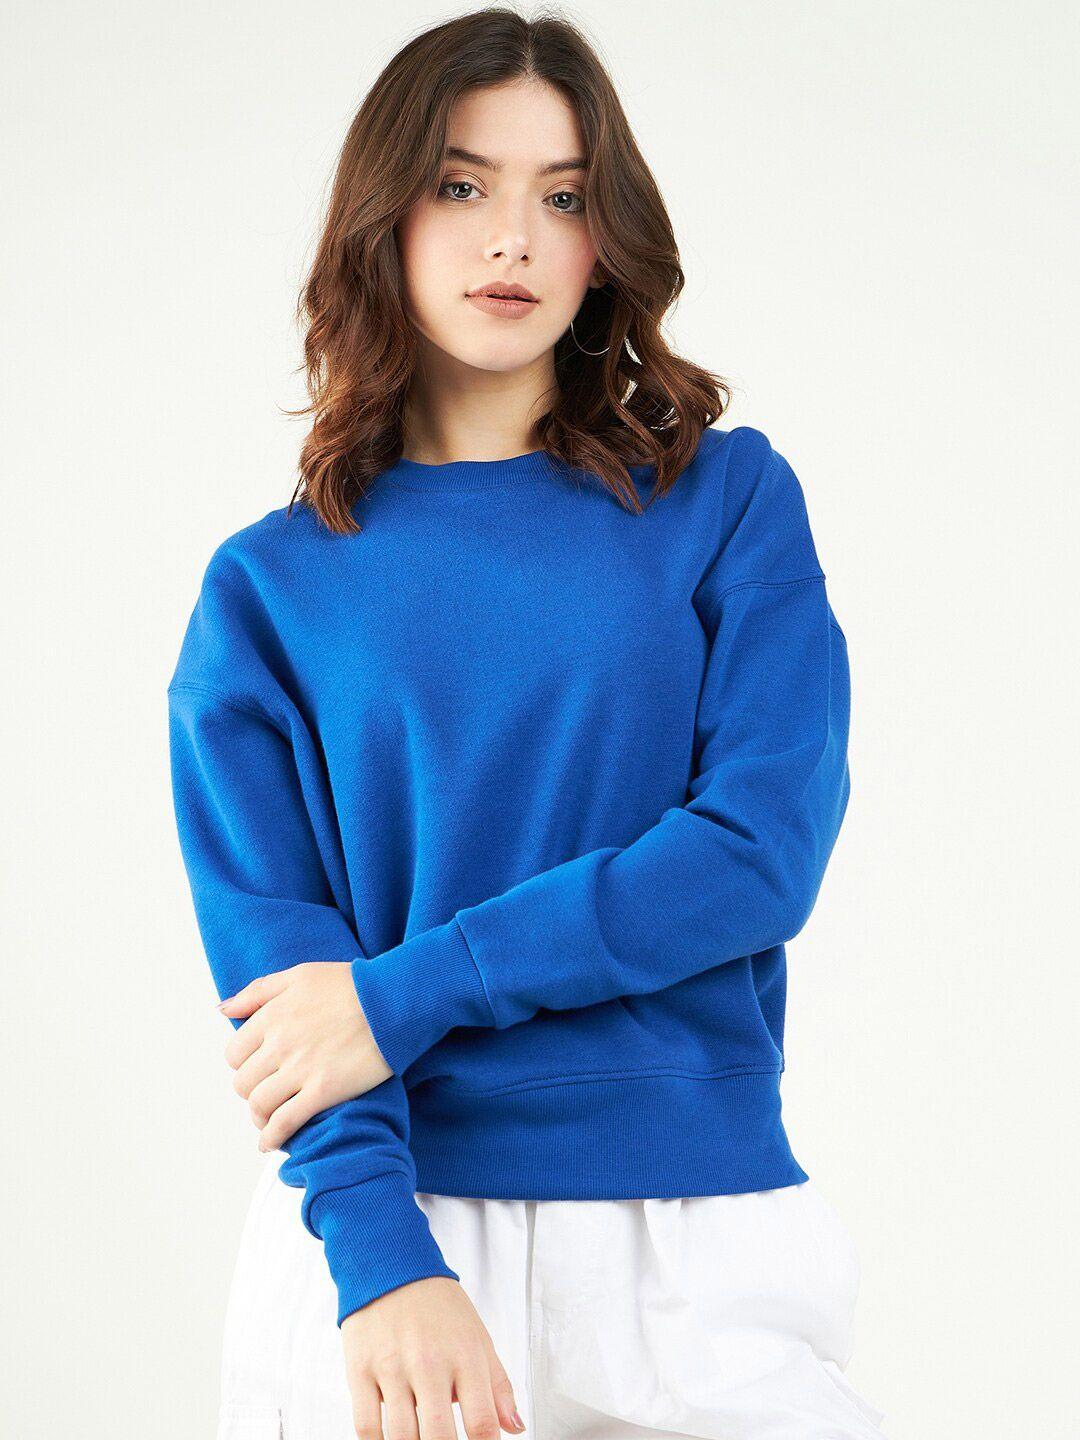 strong-and-brave-round-neck-cotton-sweatshirt